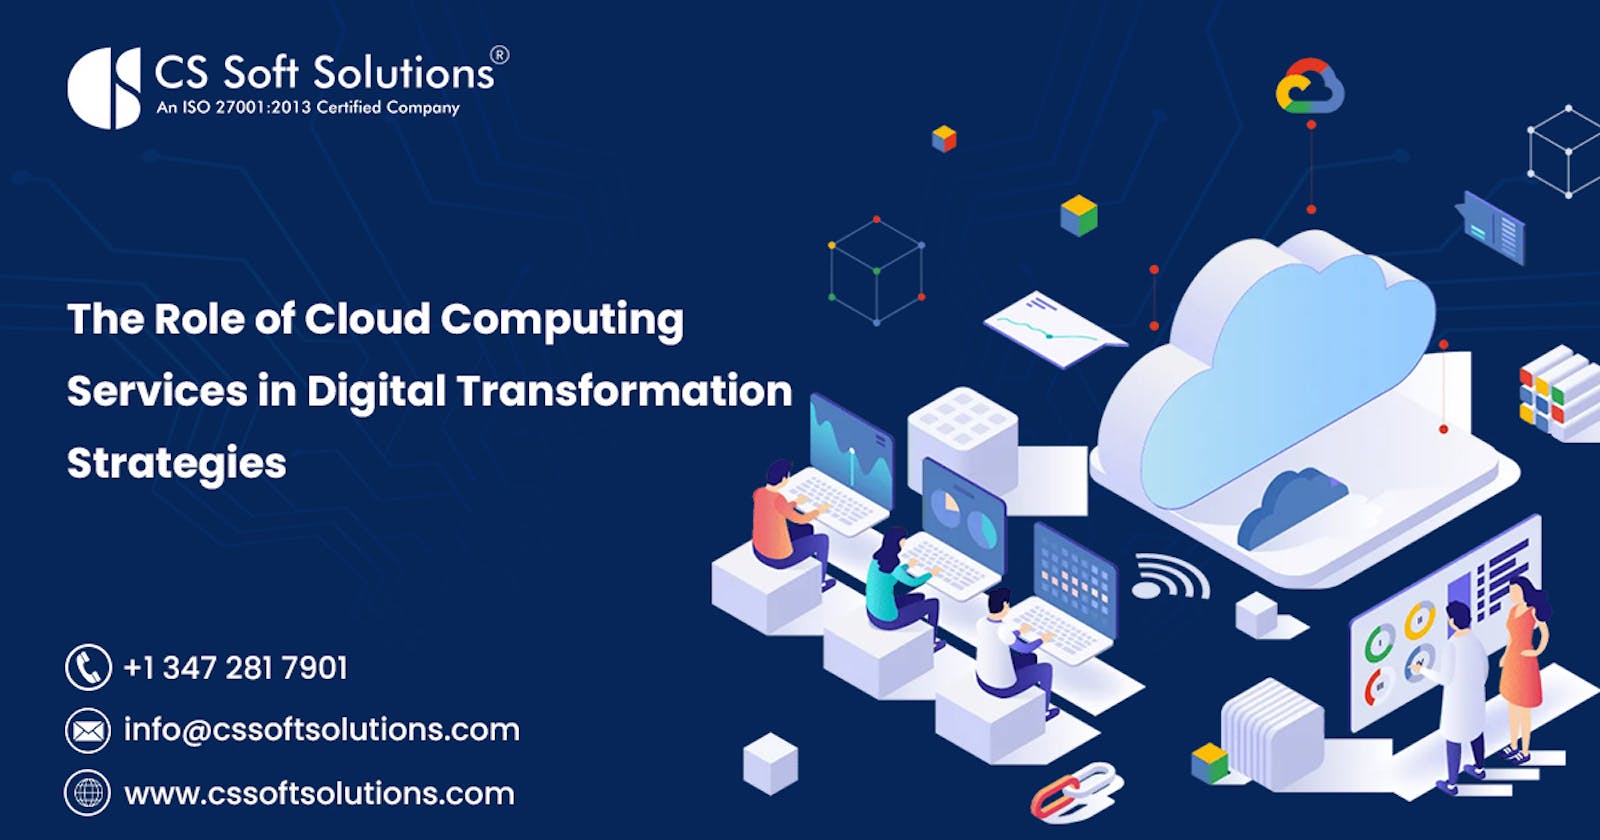 The Role of Cloud Computing Services in Digital Transformation Strategies